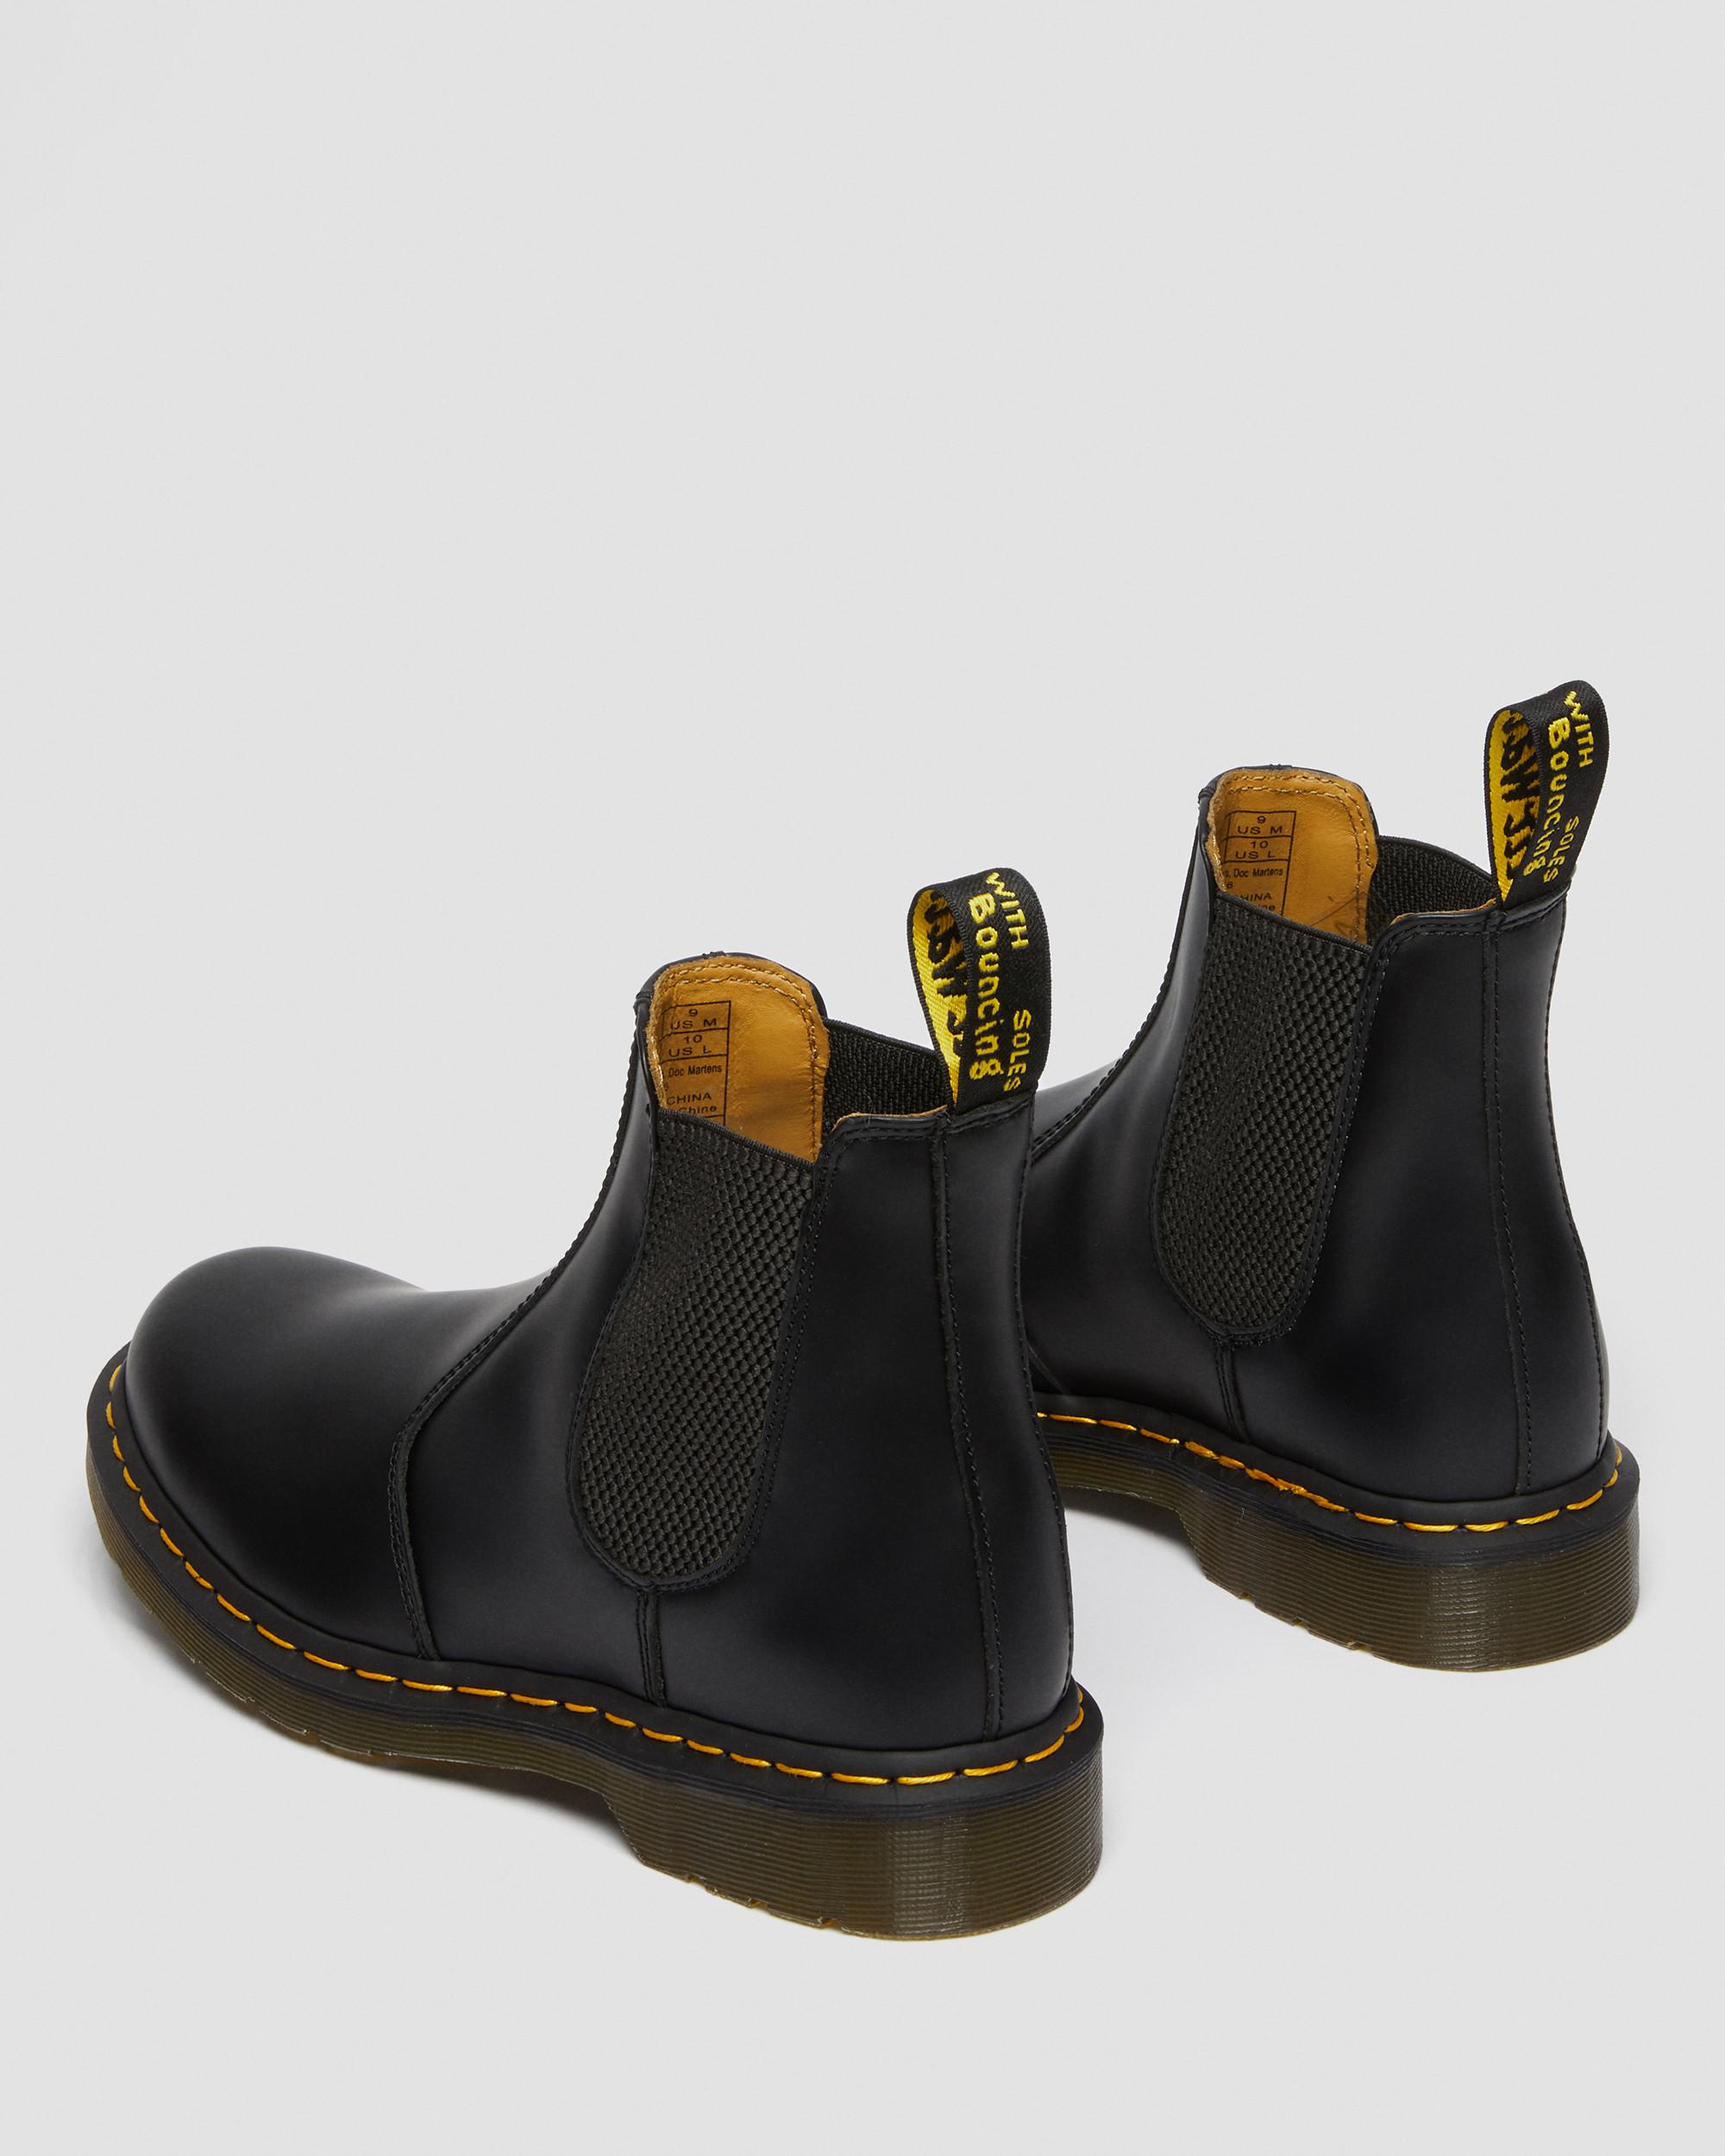 2976 Stitch Smooth Leren Chelsea Boots2976 Yellow Stitch Smooth Leren Chelsea Boots Dr. Martens